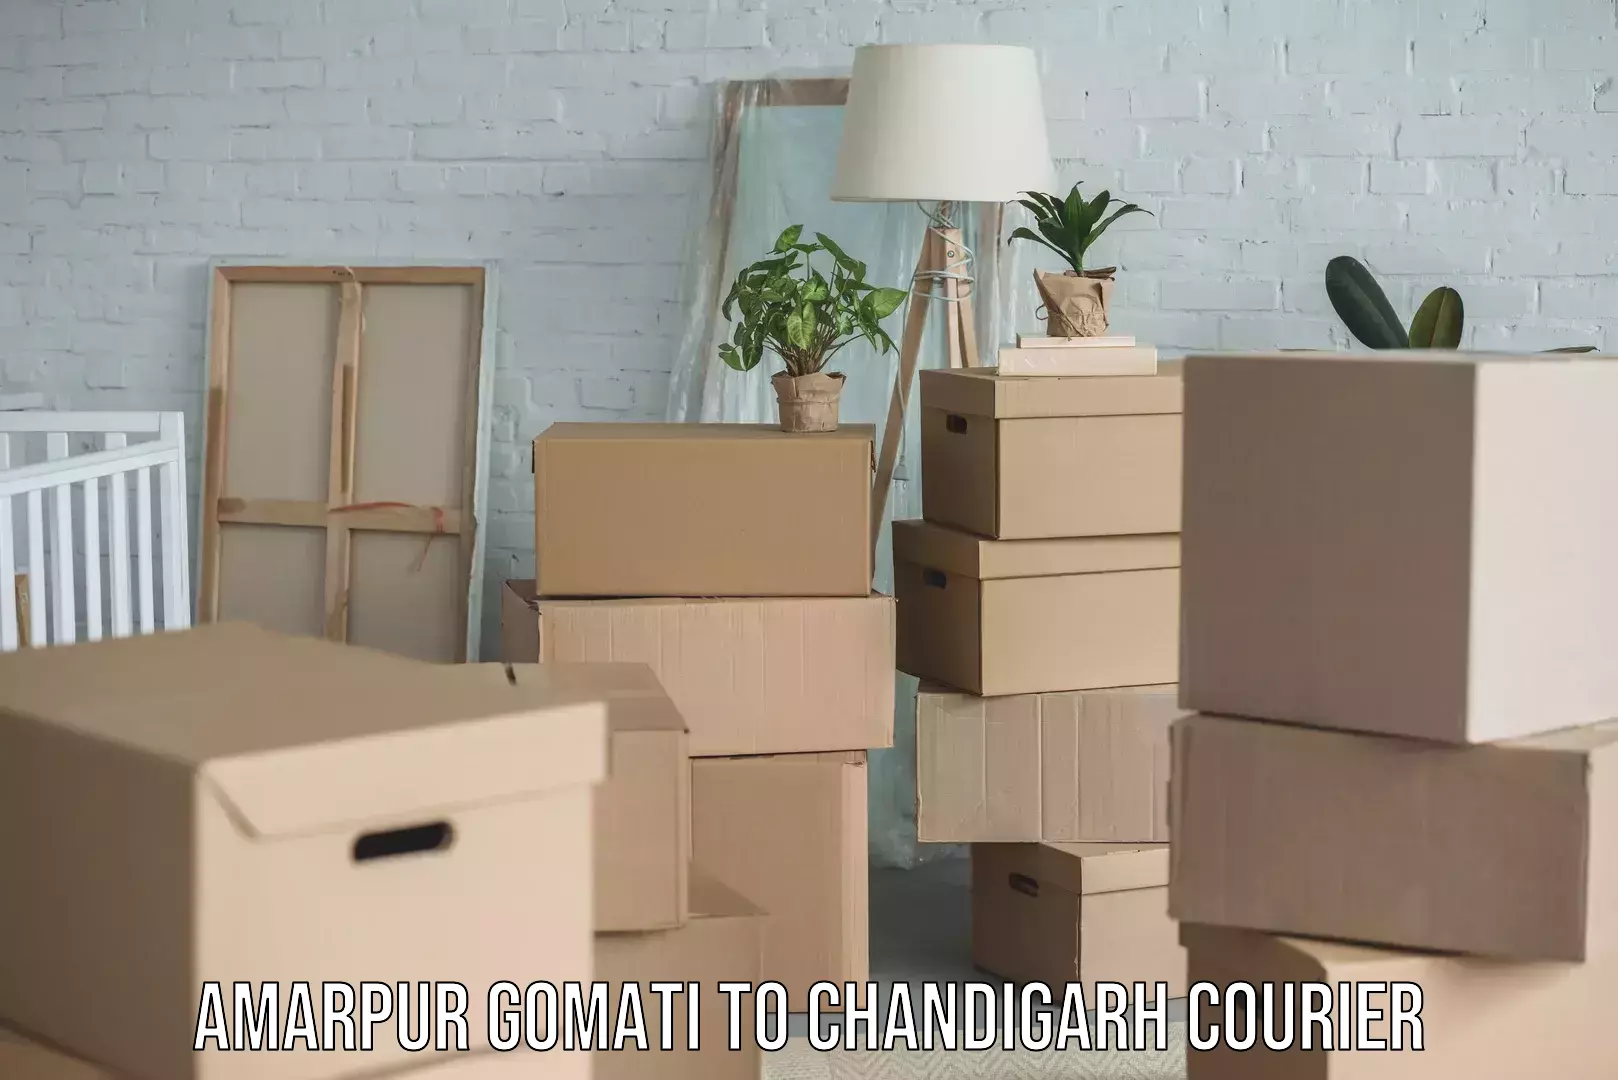 Professional courier services Amarpur Gomati to Chandigarh